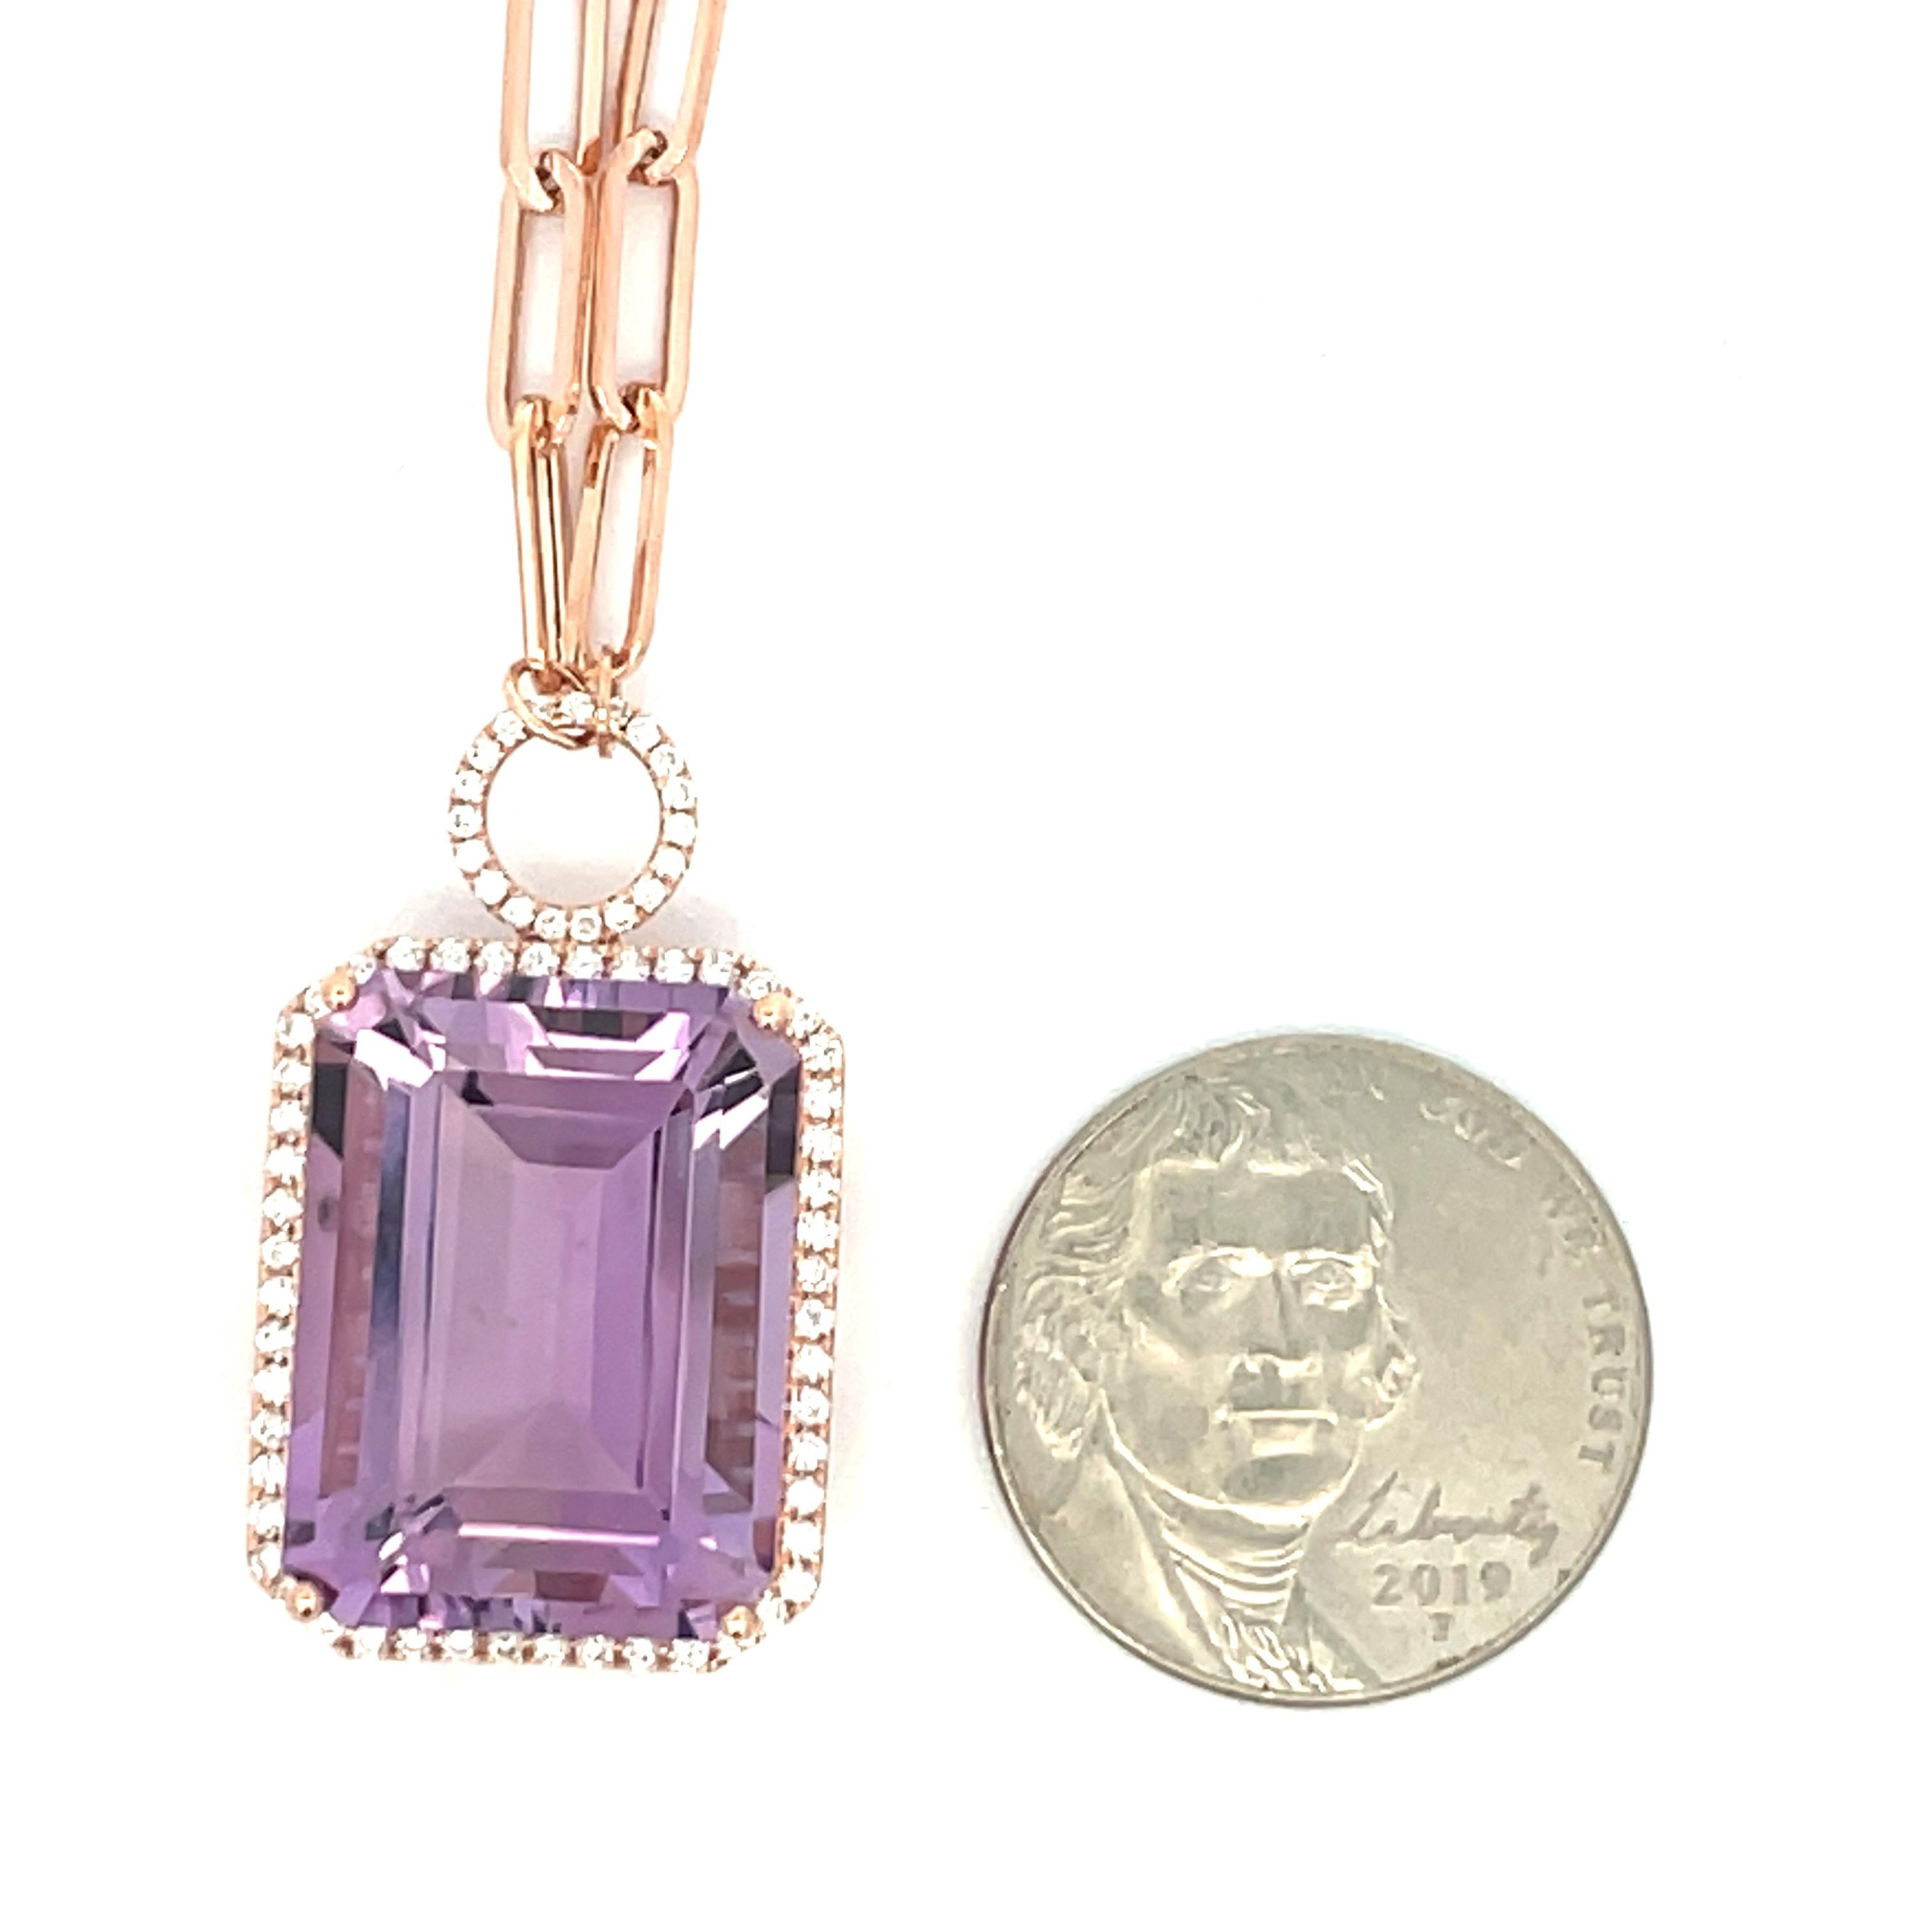 14 Karat Rose gold pendant featuring one Rose De France emerald cut weighing 22.11  carats flanked with 69 round brilliants weighing 0.49 carats on a paperclip chain. 

Amethyst: 
20 MM* 15 MM

Pendant with diamonds:
22.2 MM * 17.8 MM

More Amethyst